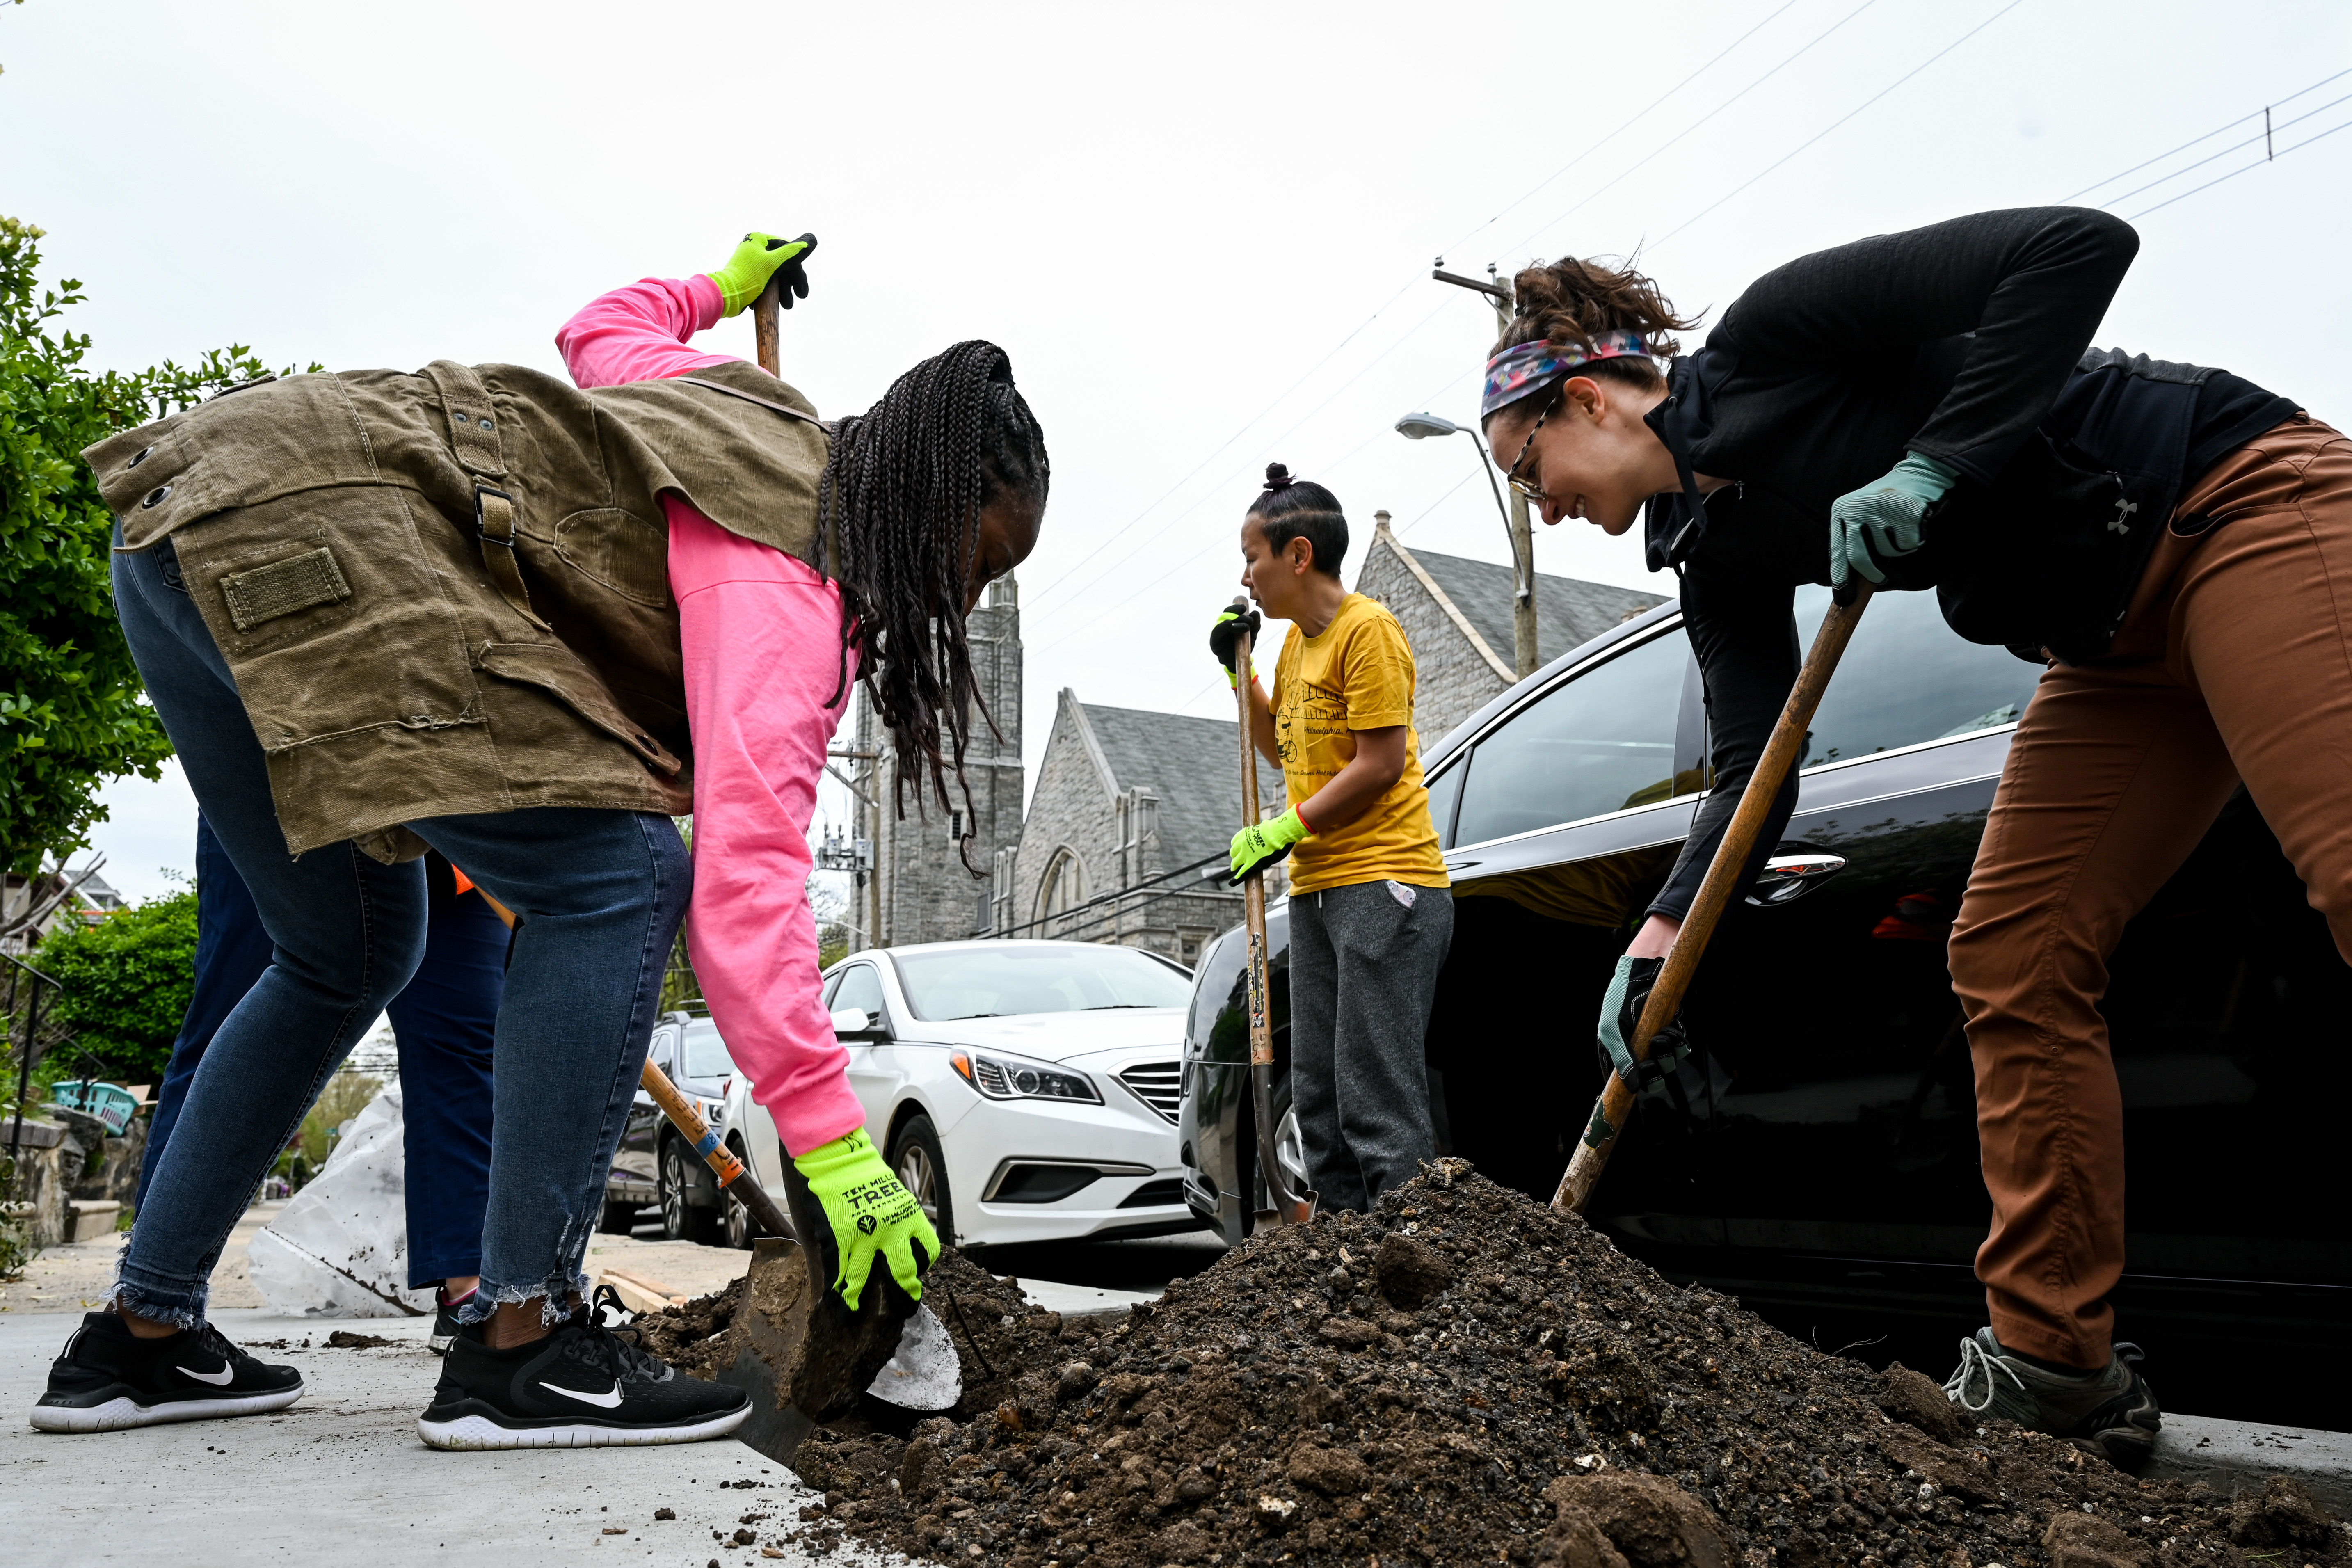 People dig in the soil along a sidewalk in preparation for planting a tree